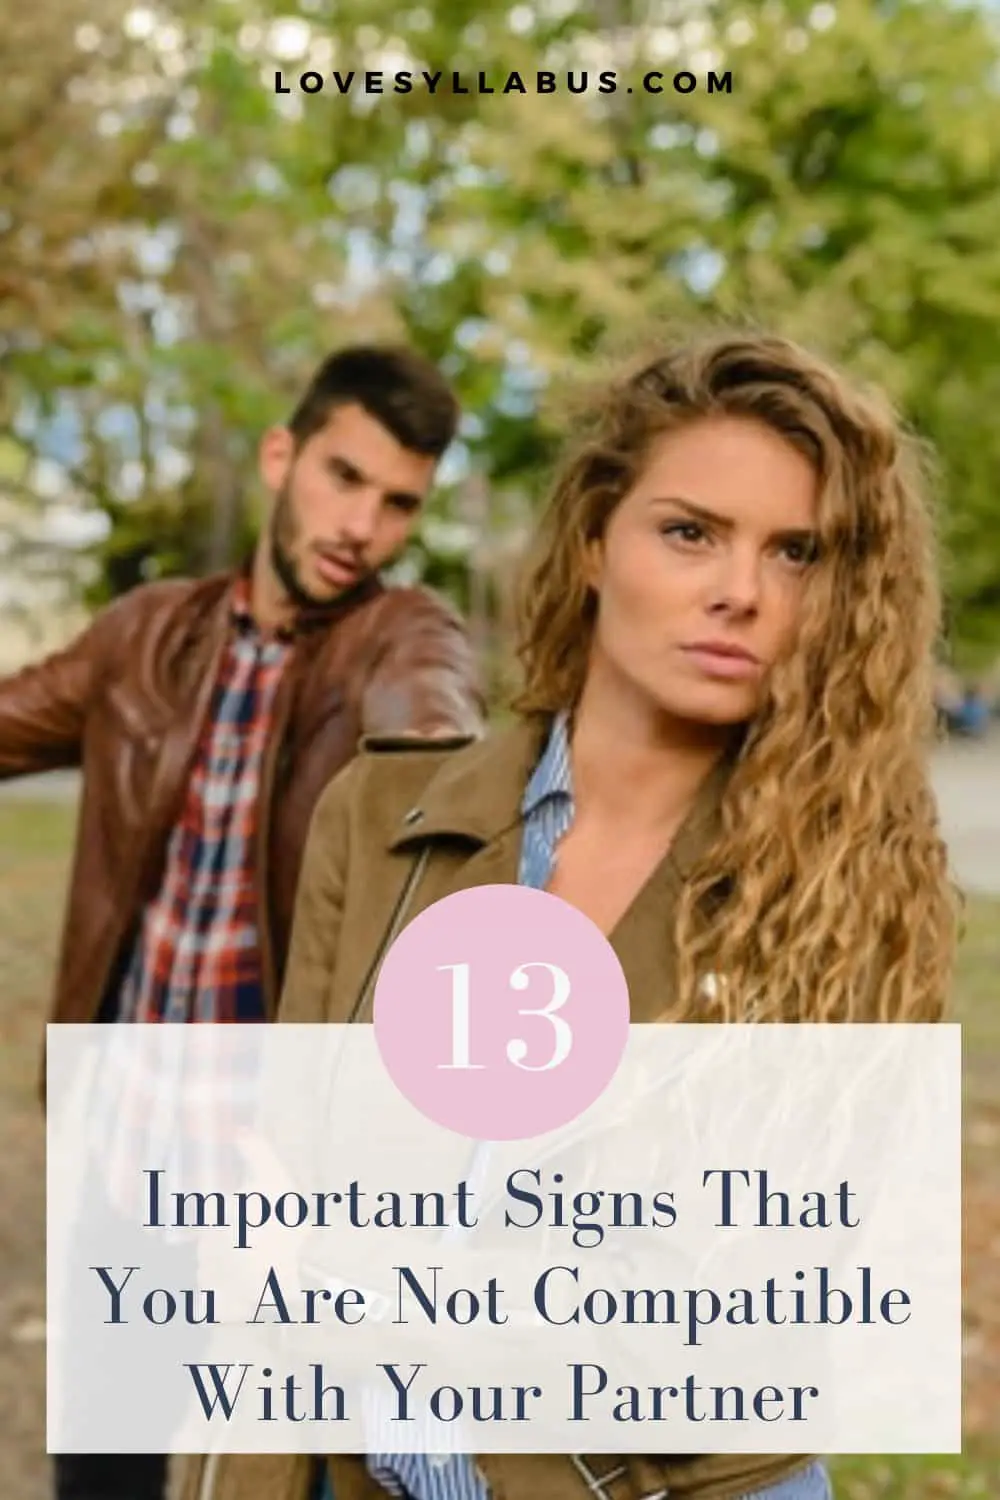 Signs That You Are Not Compatible With Your Partner